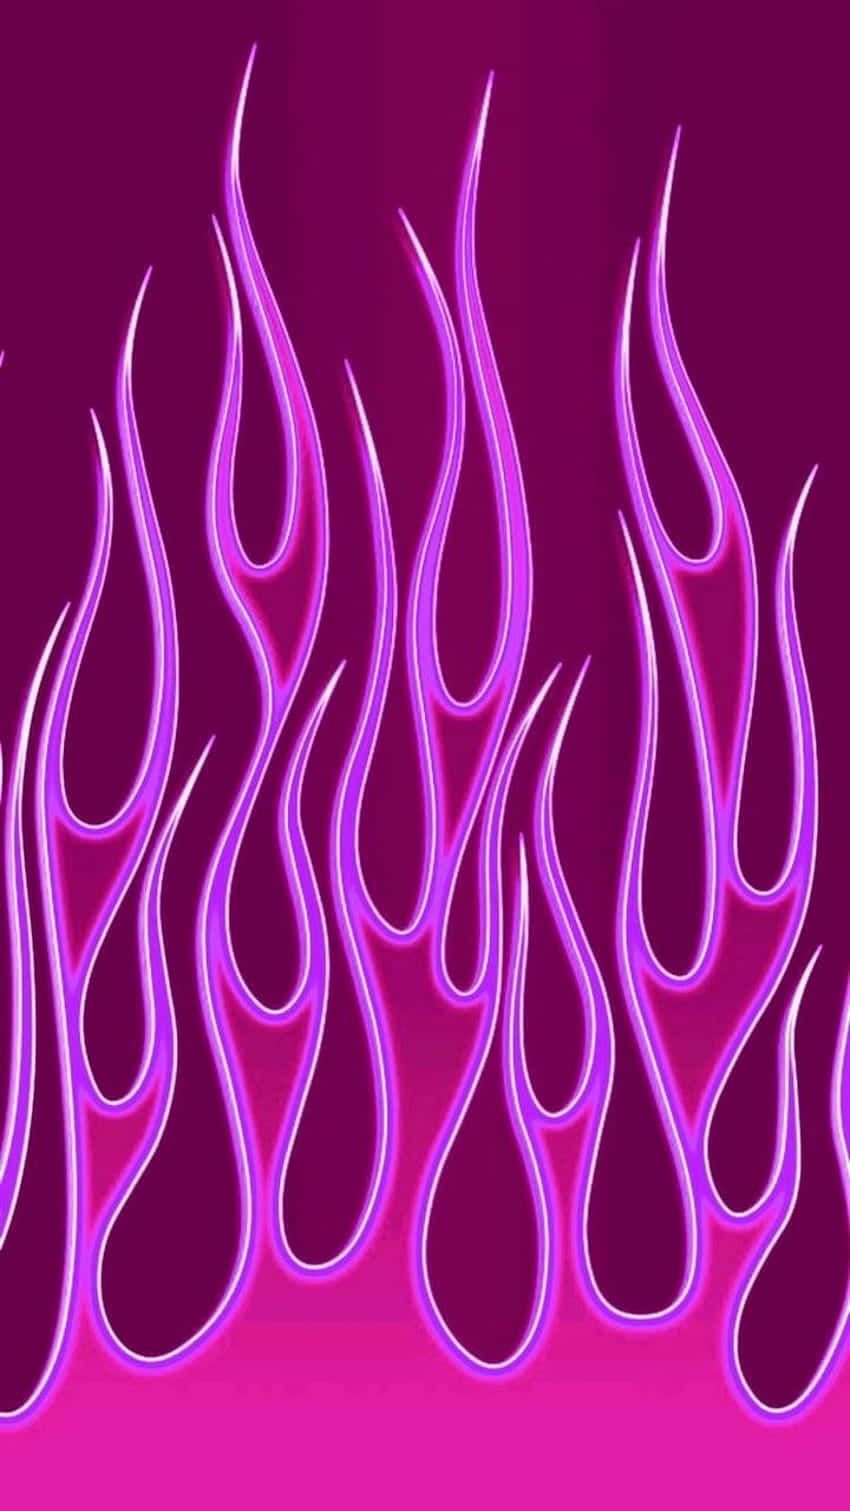 Aesthetic neon purple flames on a pink background - Flames